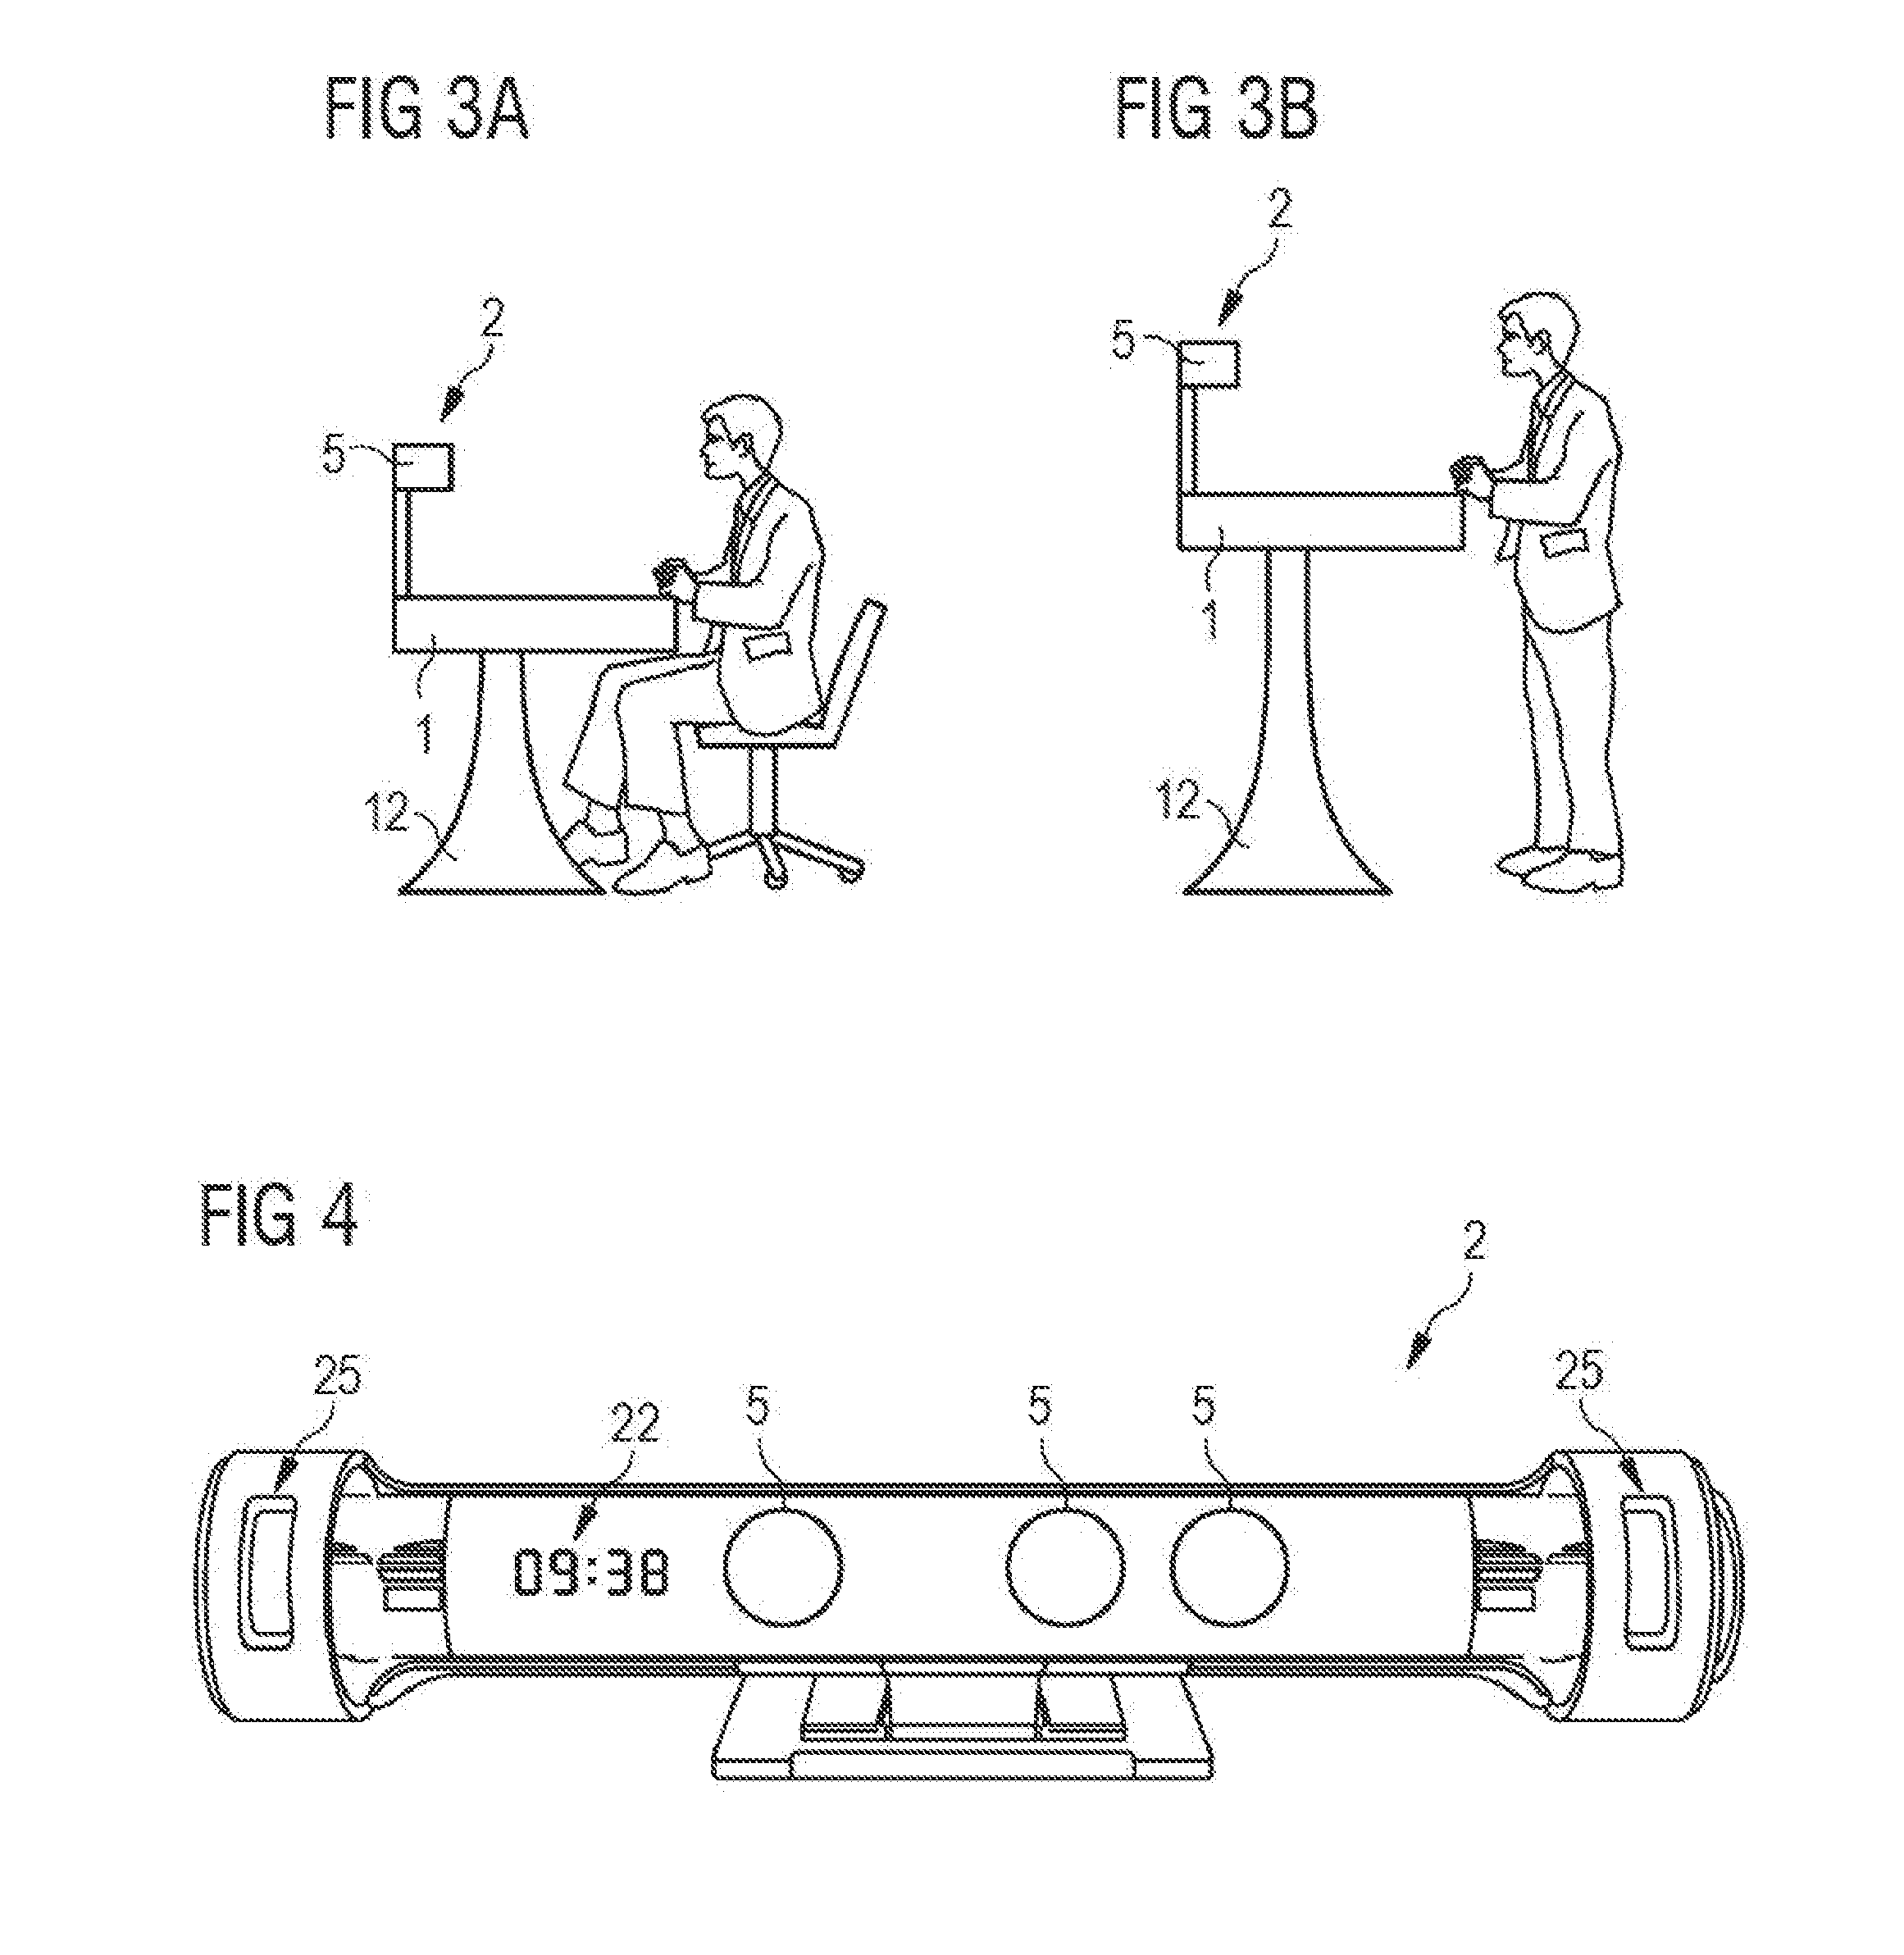 Ergonomics system for a workplace system